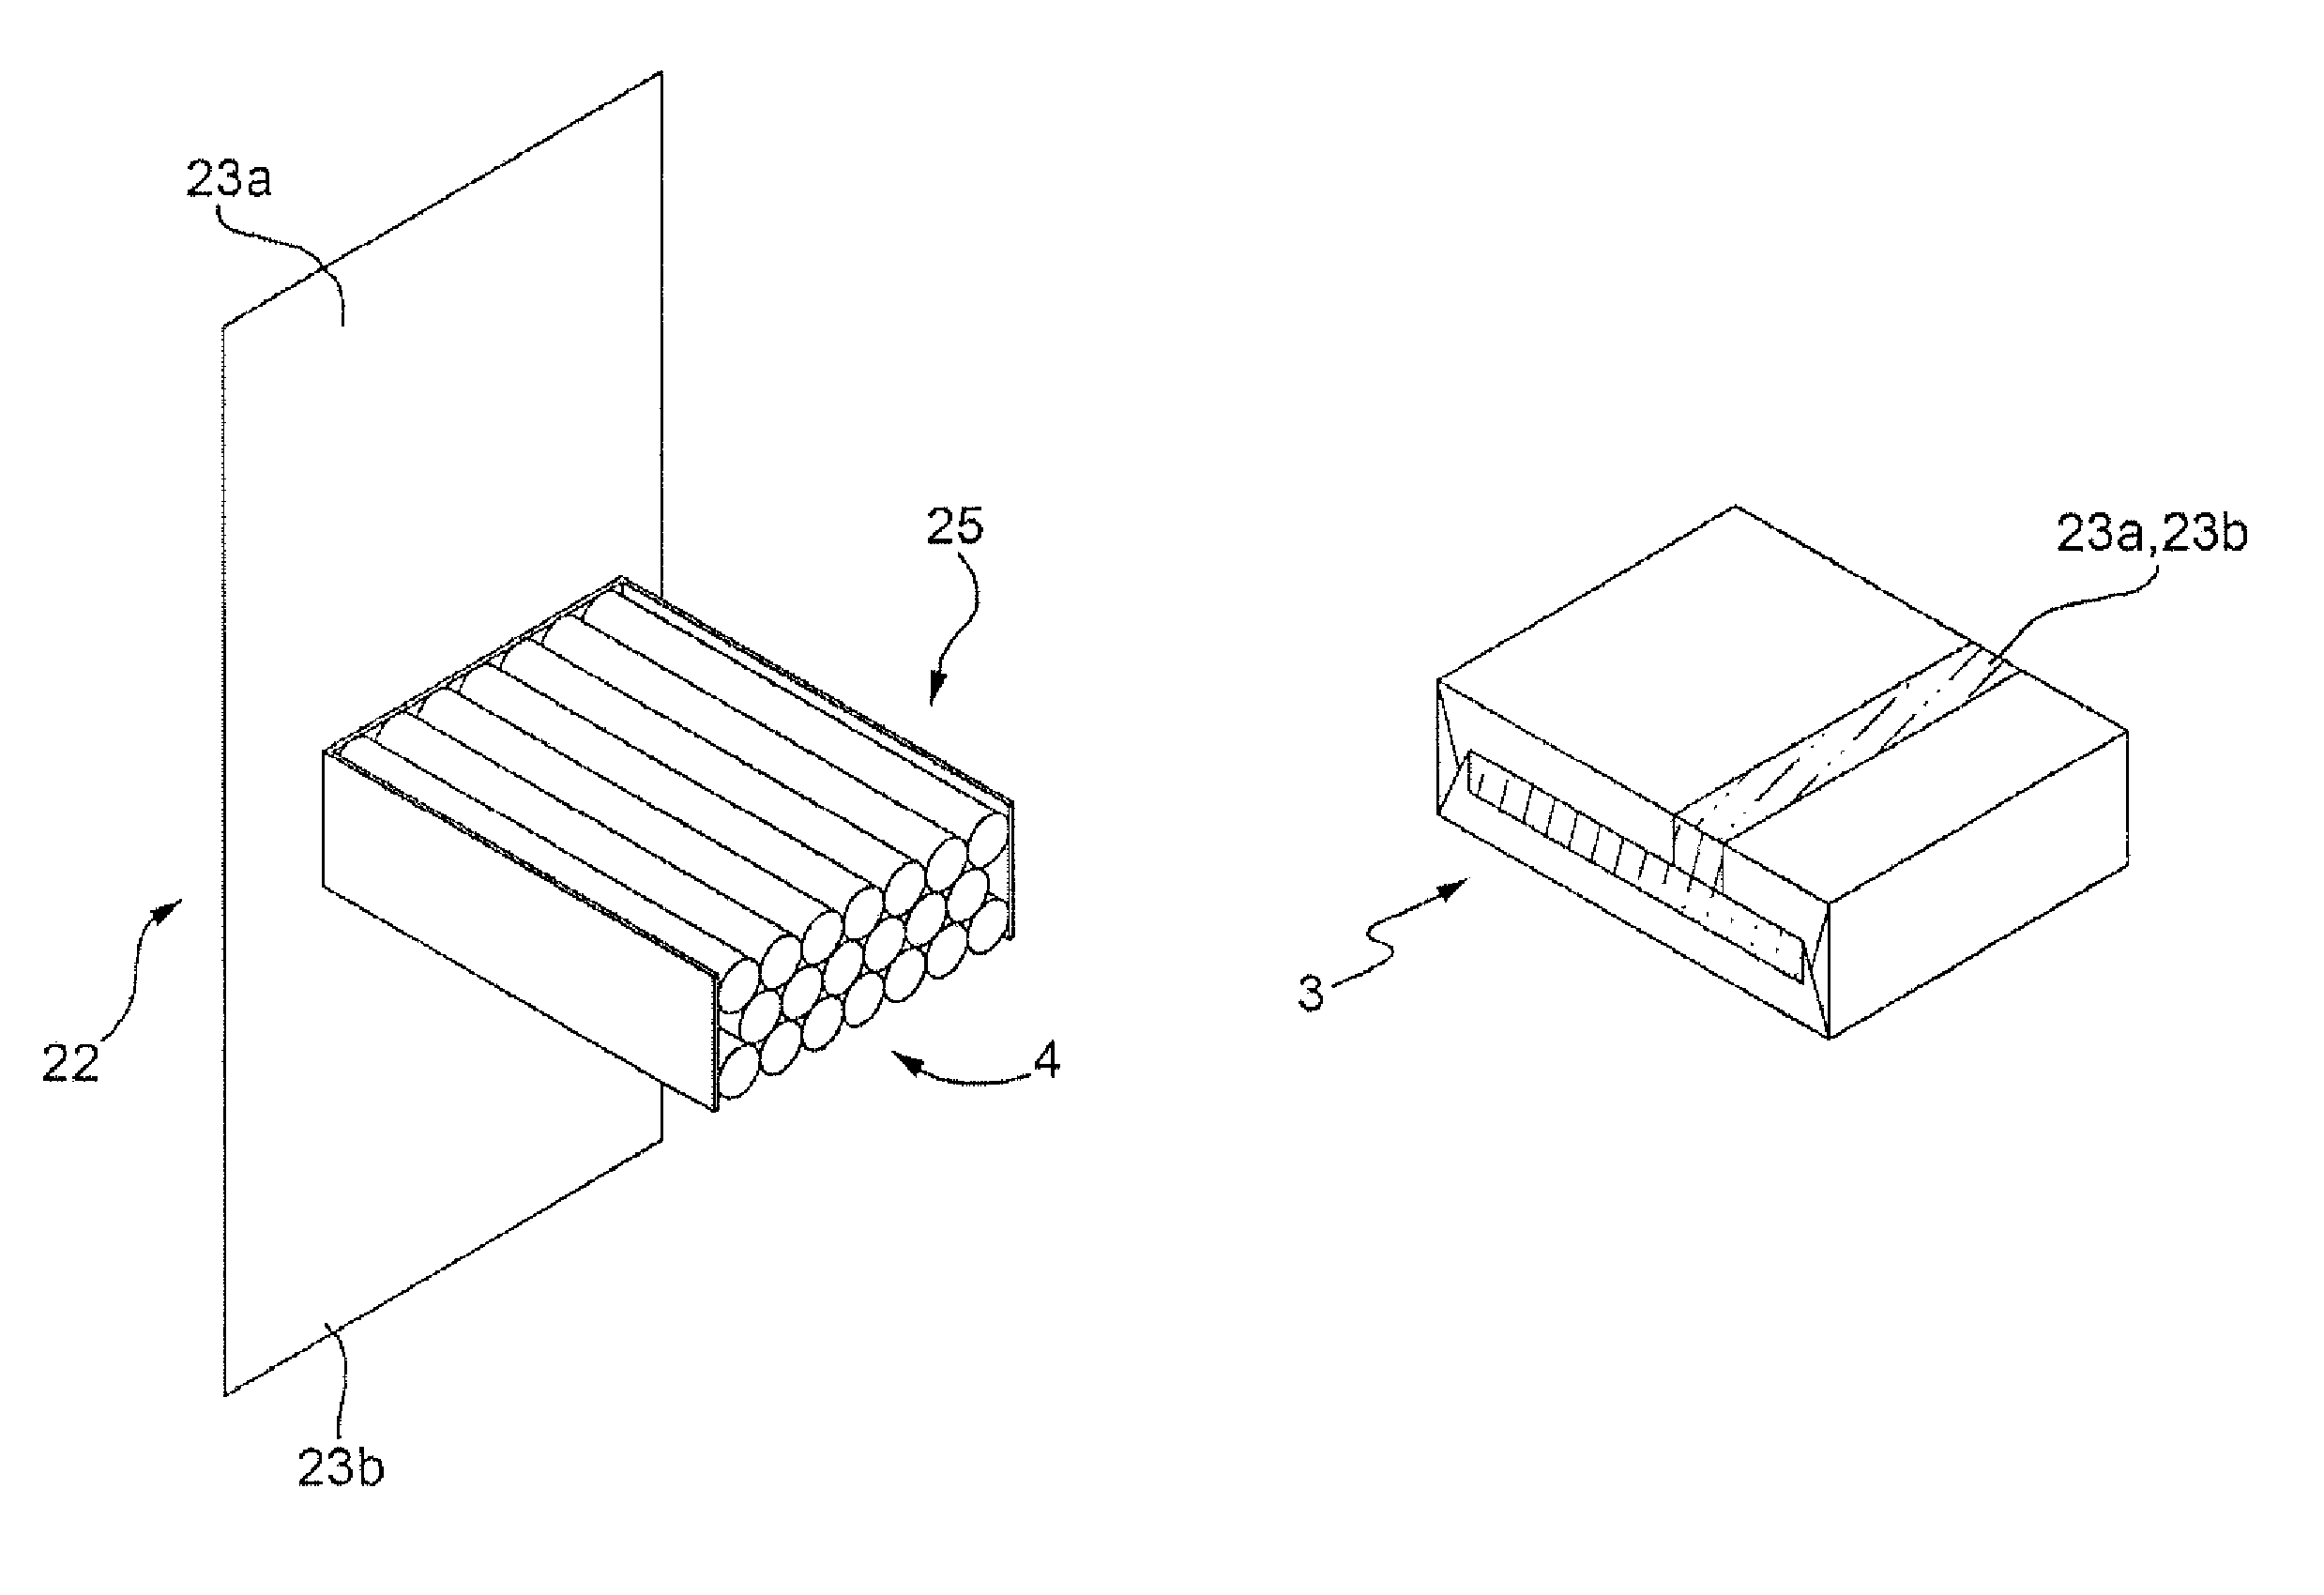 Package of cigarettes having an inner package with a stiffener